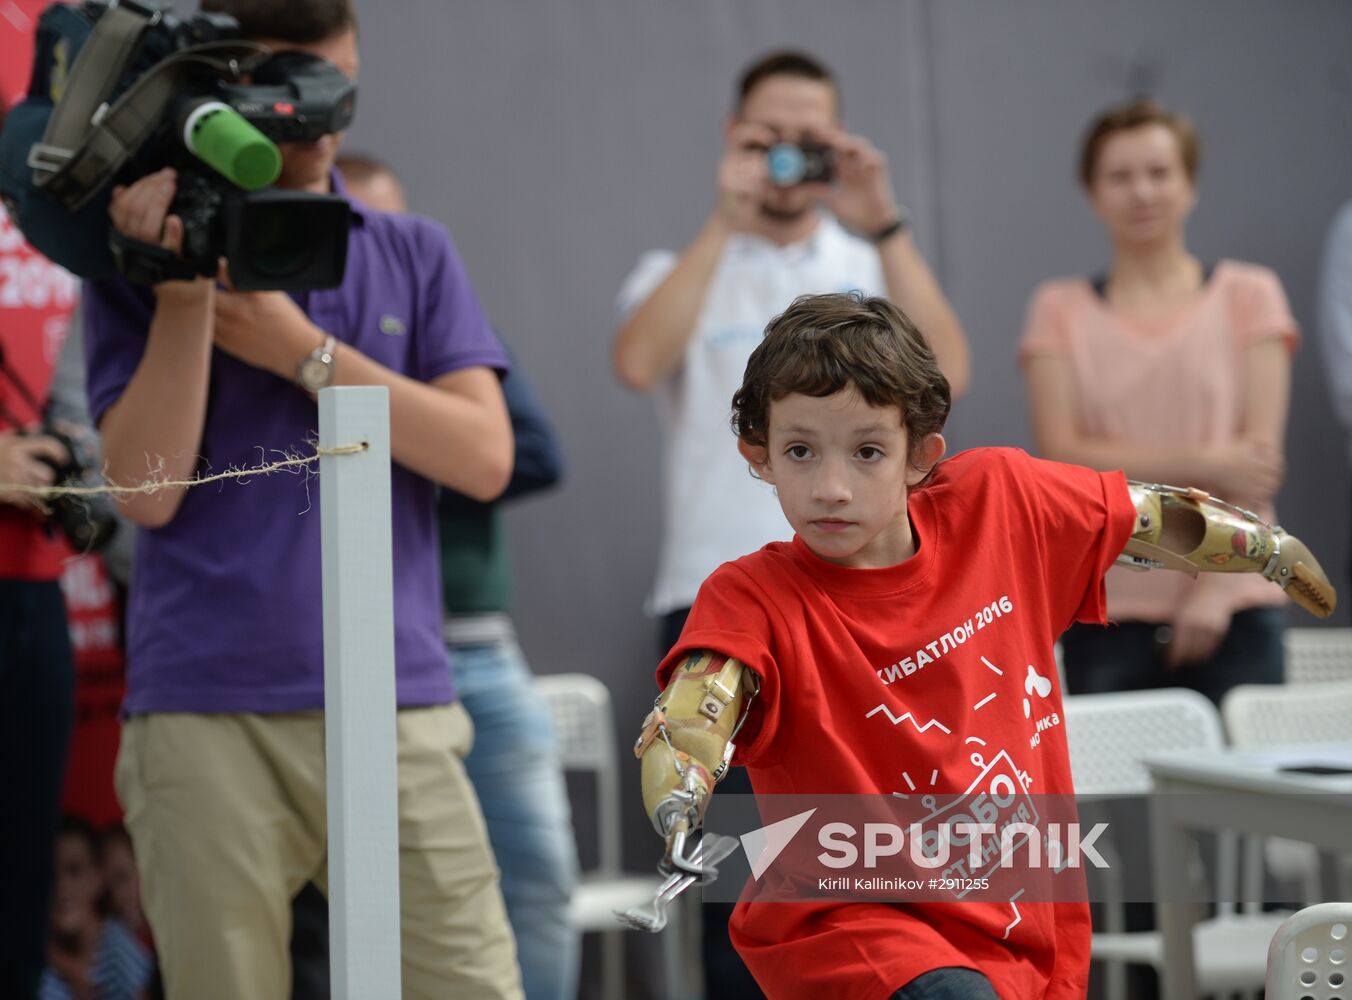 Russia's first contest among handicapped people Cybathlon